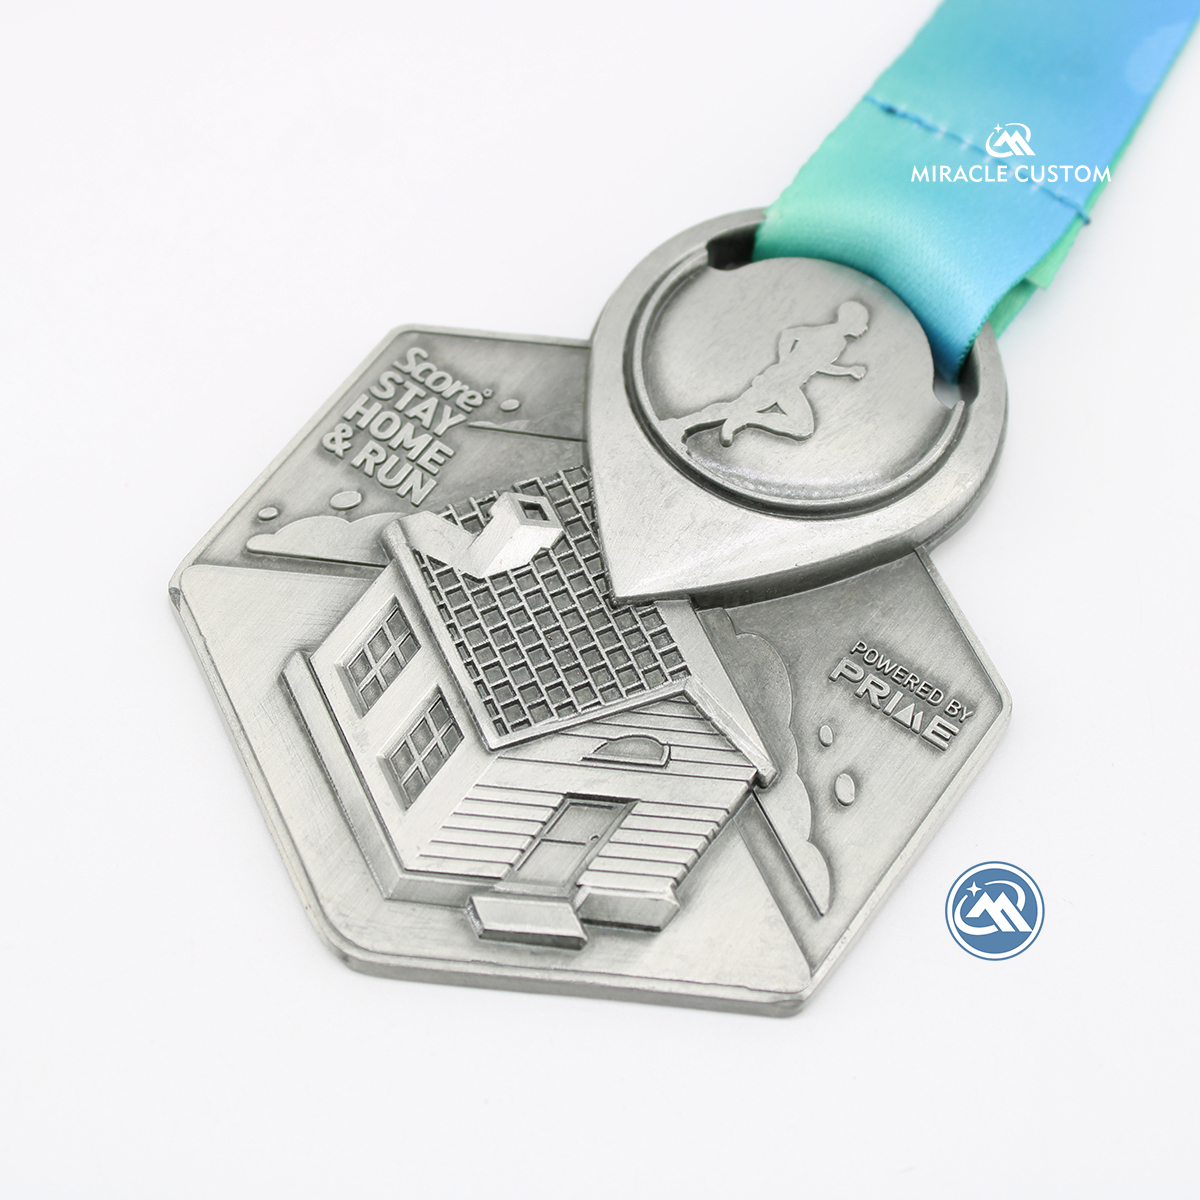 Custom SCORE Stay Home and Run 5K Challenge Medals